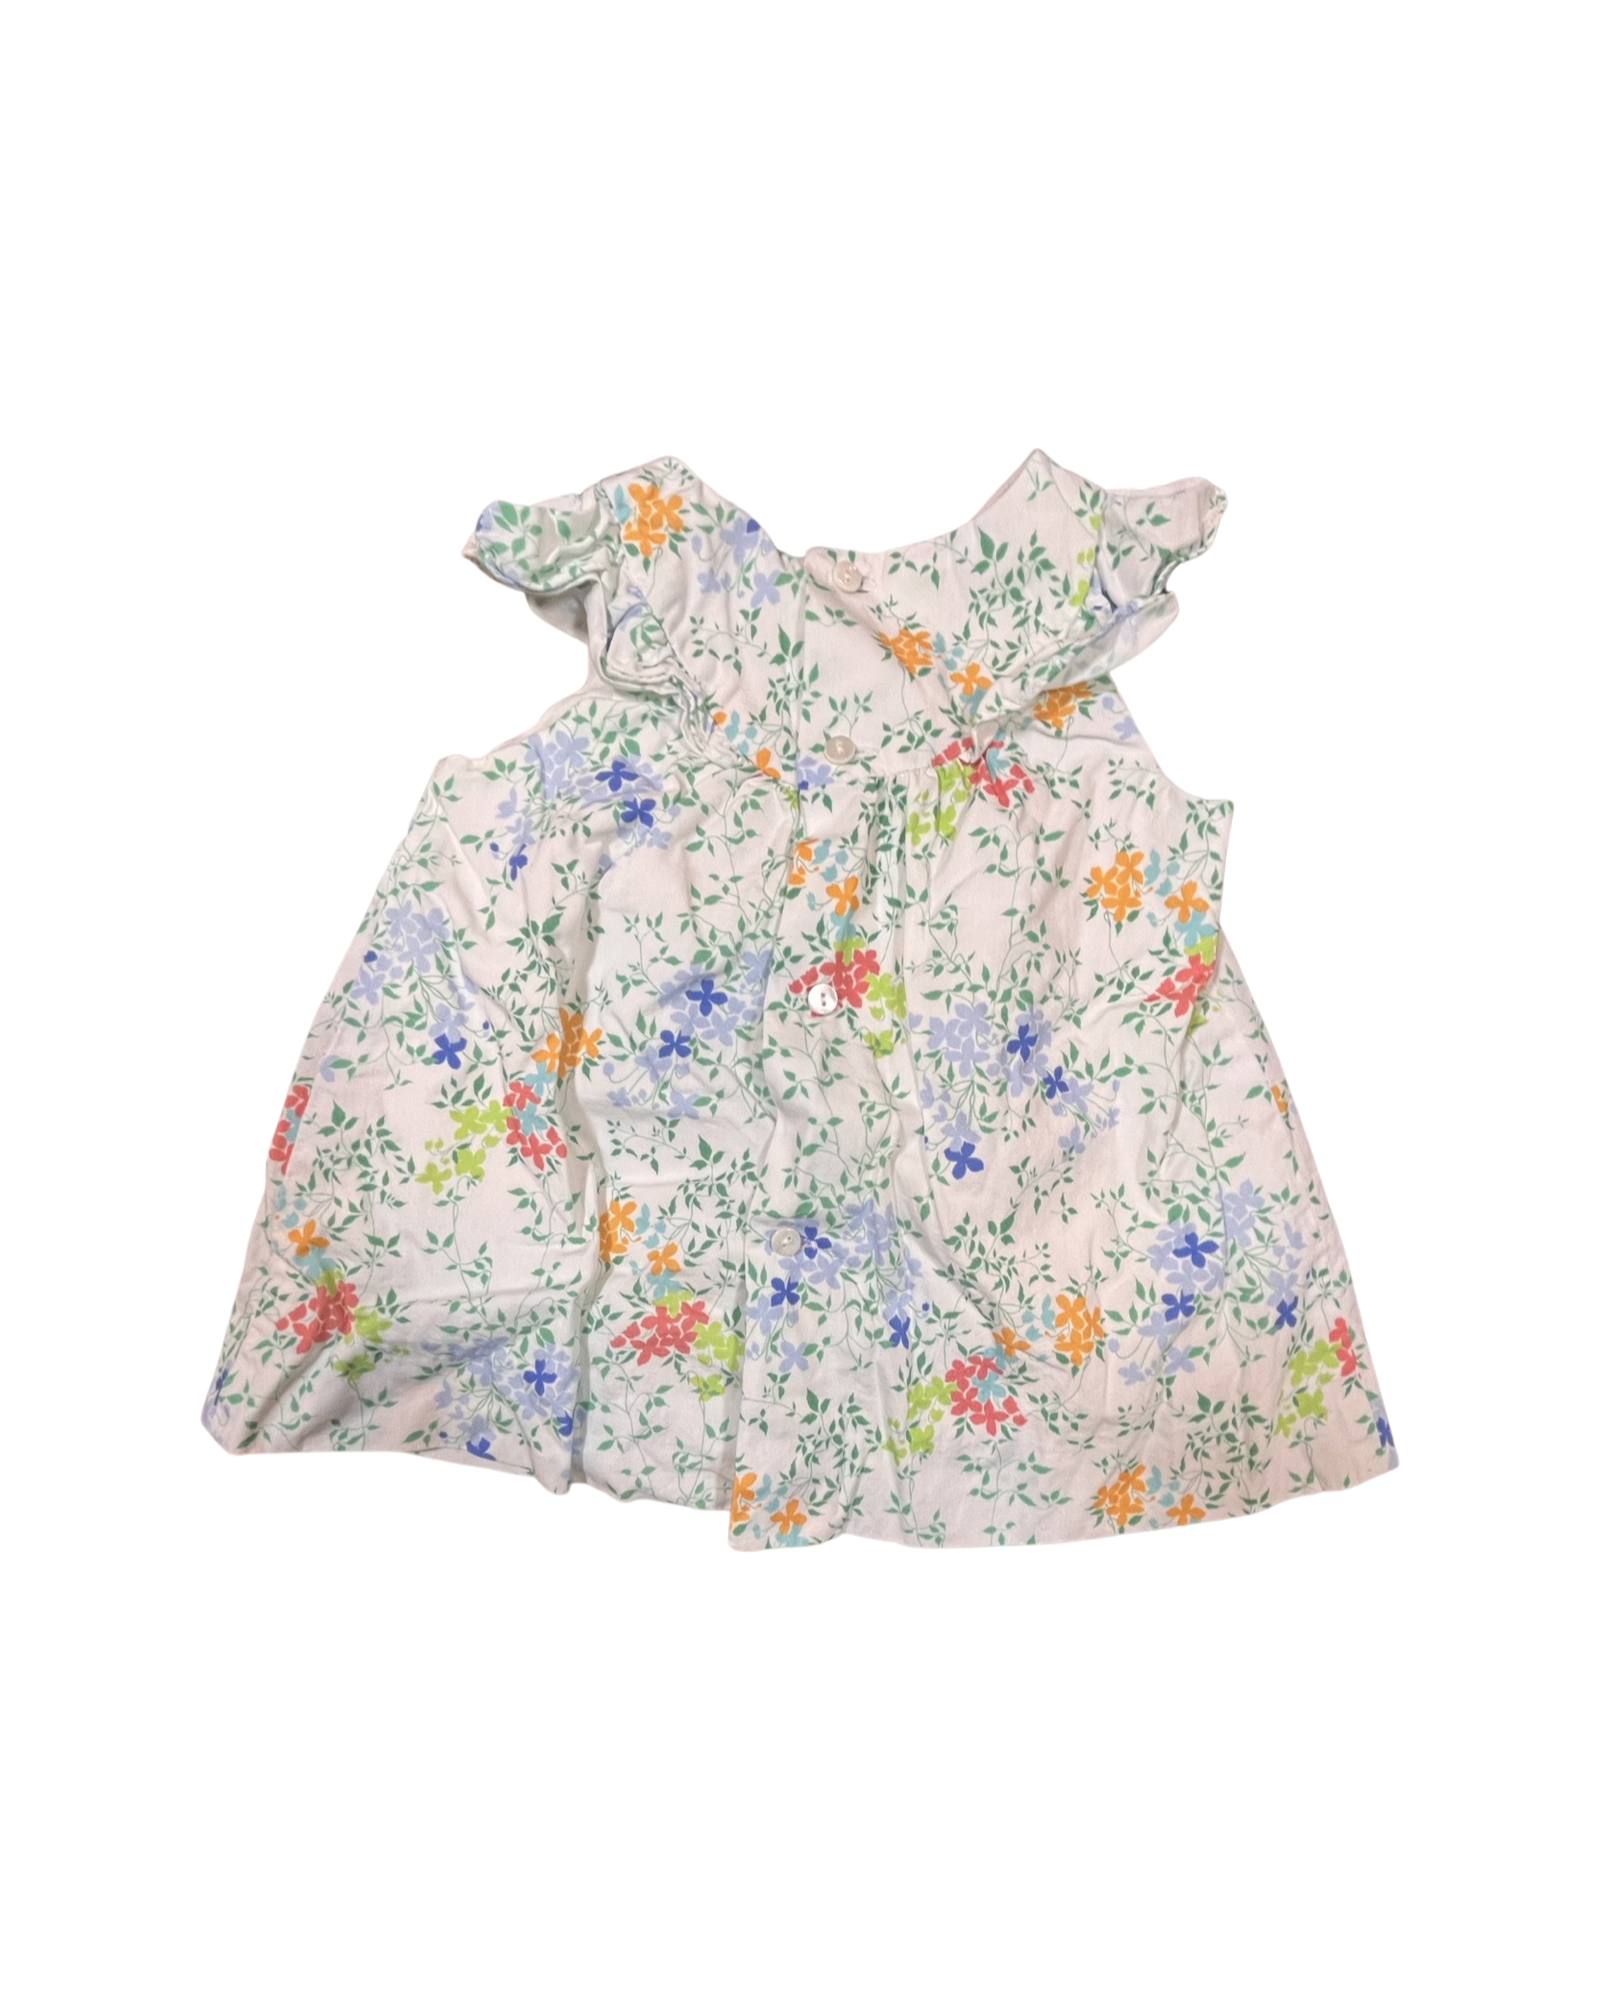 Zara White, Green Pink and Blue Dress with Diaper Cover (6-9M)